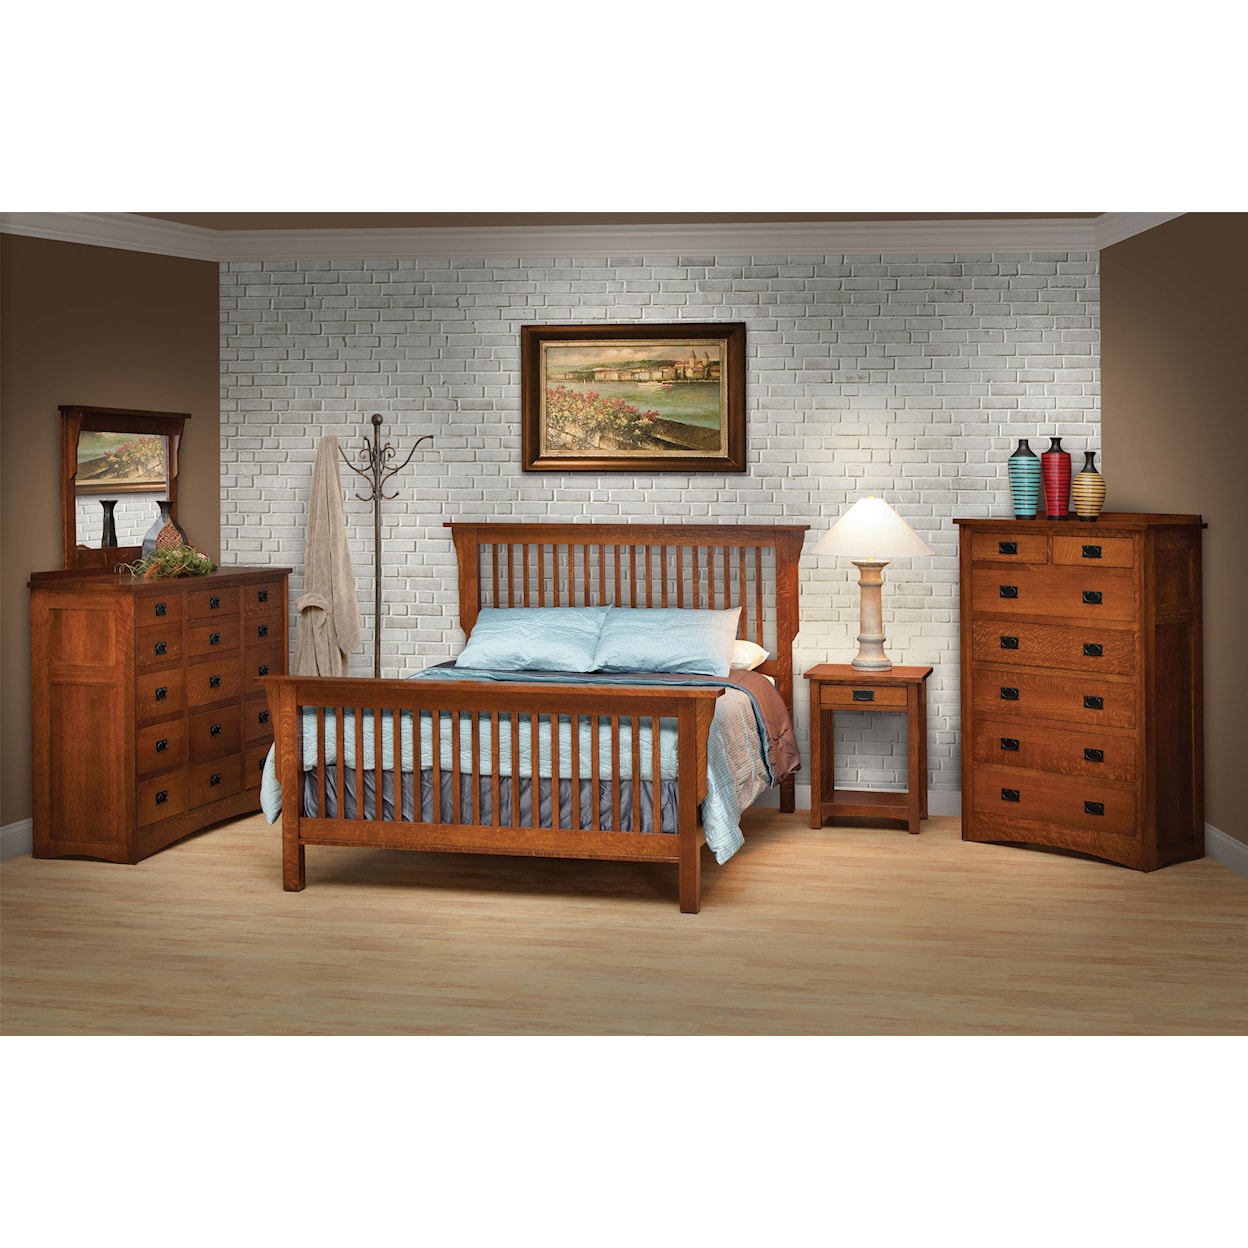 Daniels Amish Mission King Bedroom Group